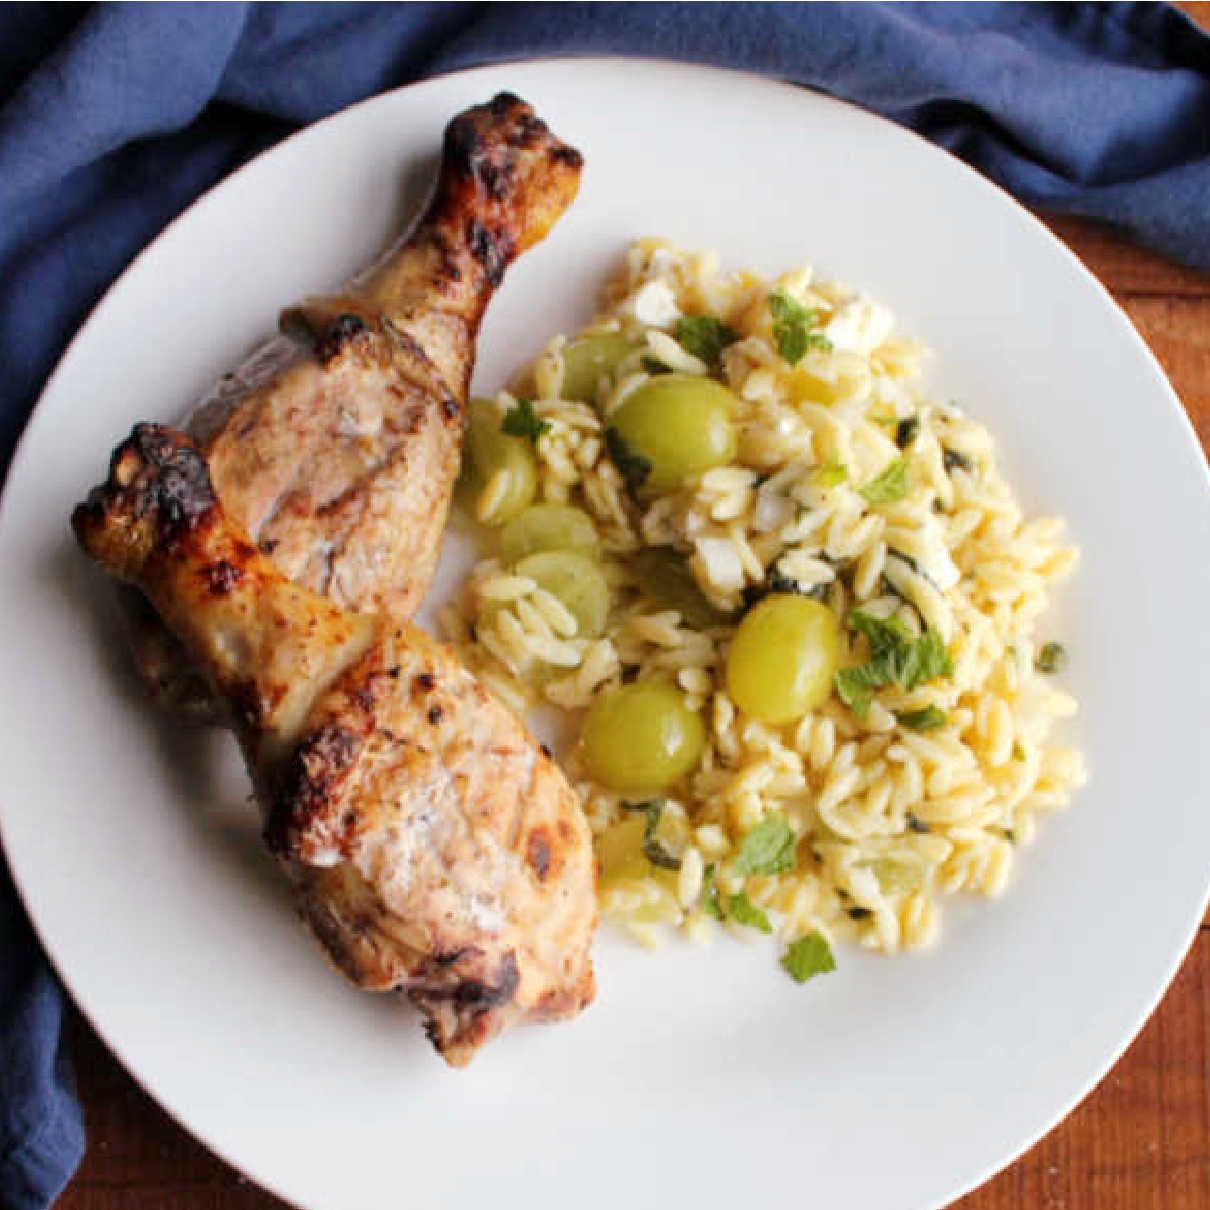 grilled chicken that has been marinated in lemon, yogurt and herbs on plate with orzo pasta salad.